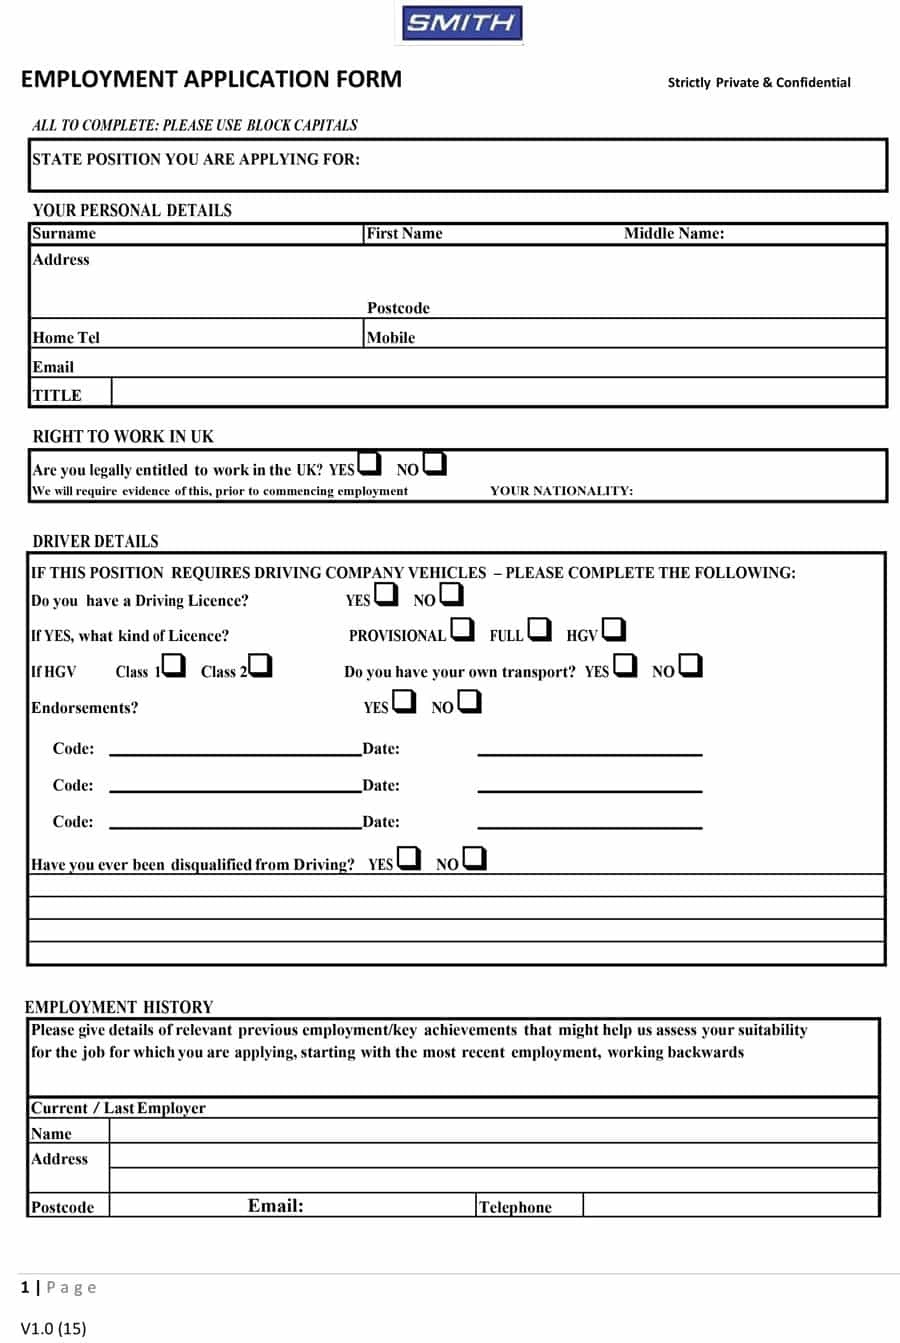 50 Free Employment / Job Application Form Templates [Printable] ᐅ - Find Free Printable Forms Online